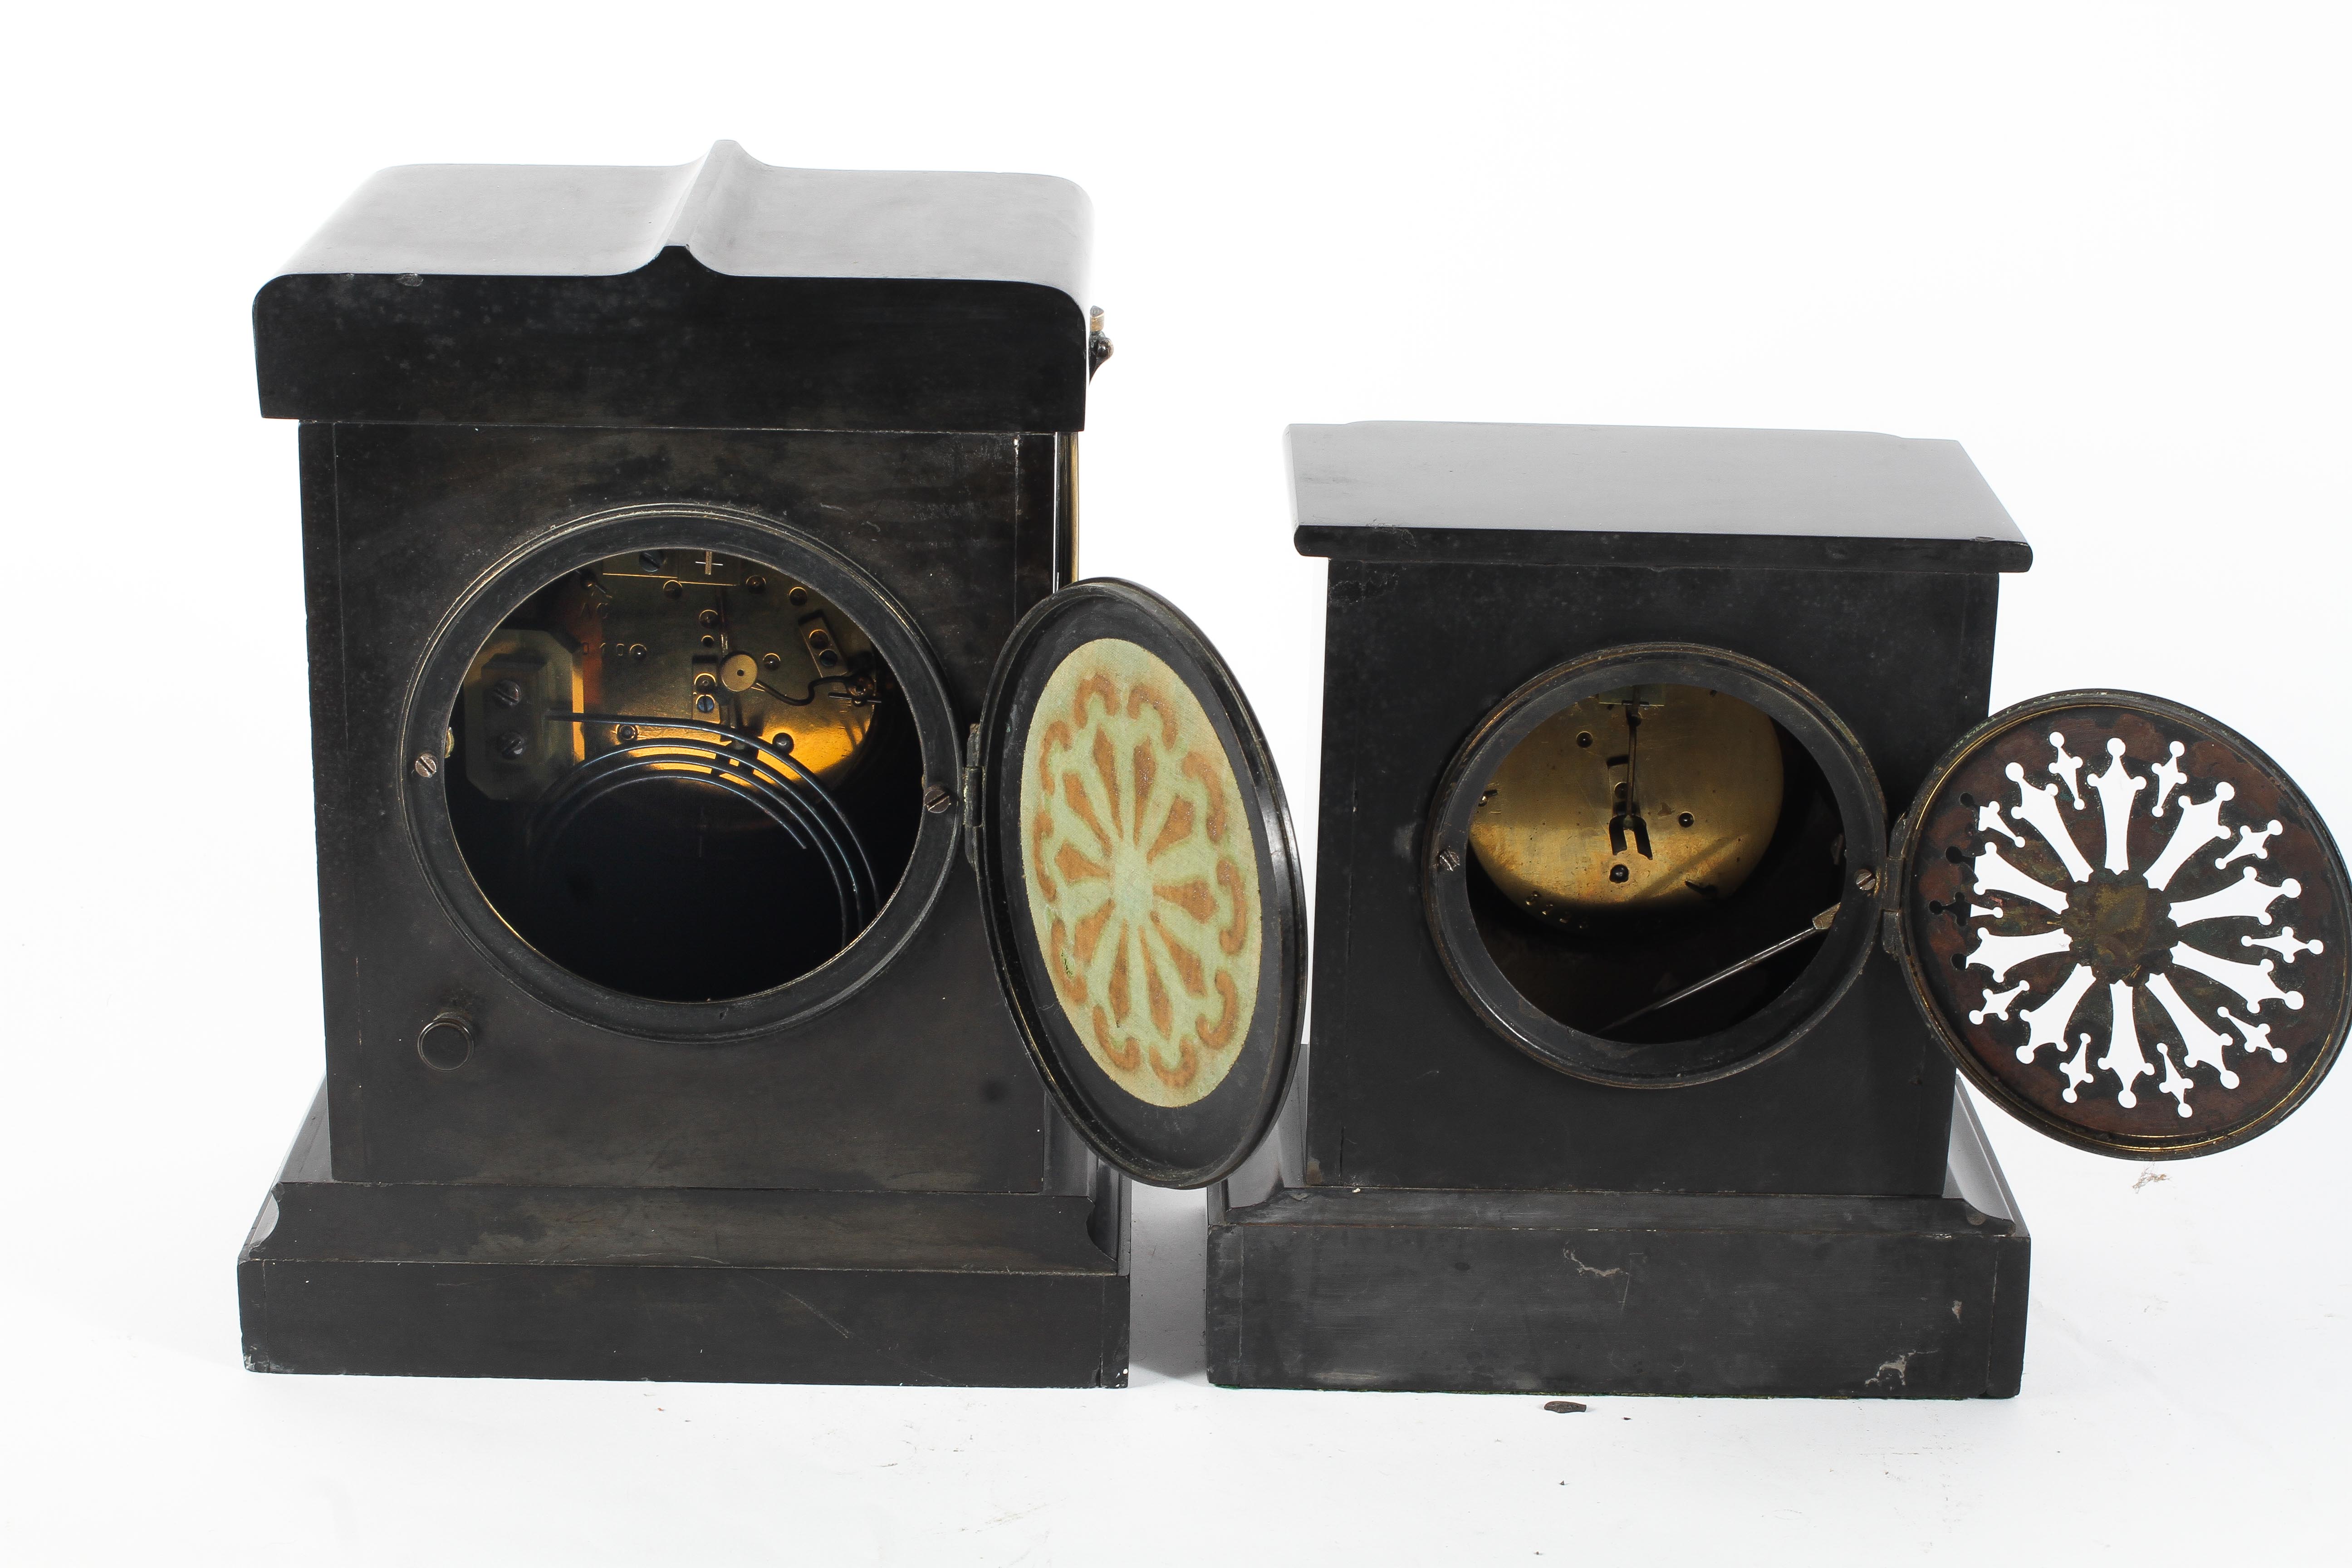 Two late 19th century slate mantel clocks, each with white enamelled dials and black Roman numerals, - Image 2 of 2